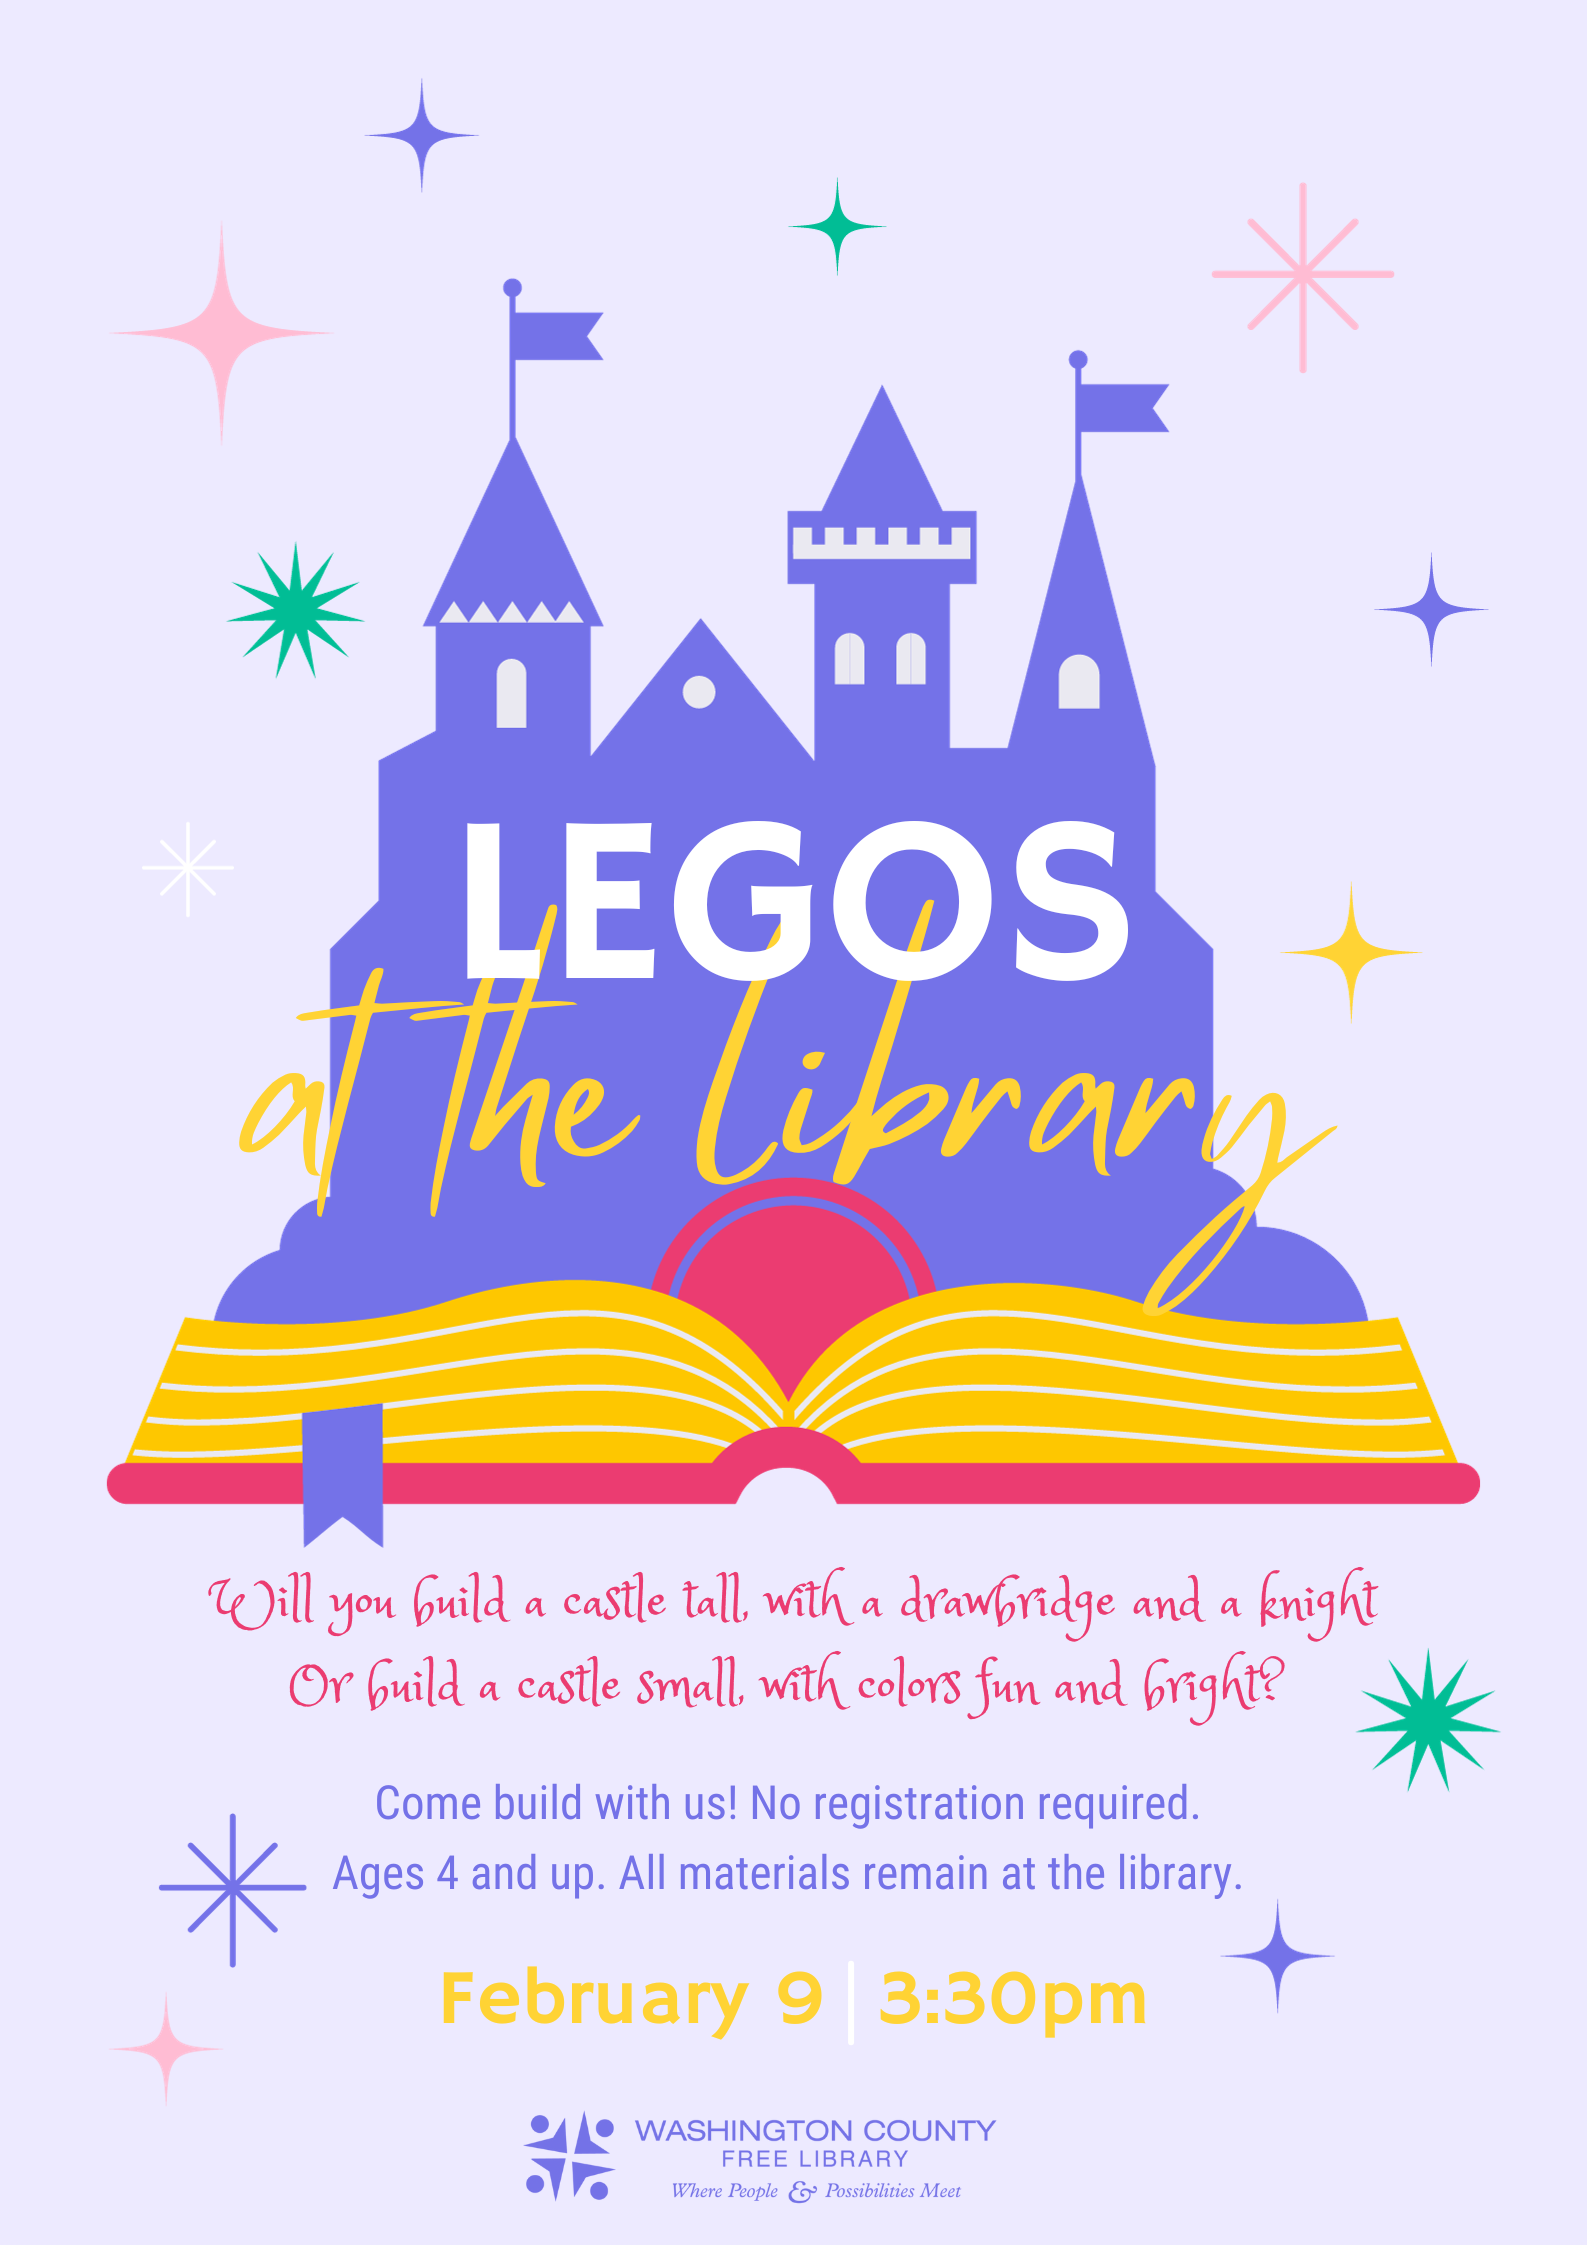 Legos at the Library! The poster boasts a vibrant indigo castle with towers and flags bursting forth from an open book with lustrous yellow pages. The poster reads: "Will you build a castle tall with a drawbridge and a knight, or build a castle small with colors fun and bright? Come build with us. No registration required. Ages 4 and up. All materials remain at the library. February 9, 3:30 p.m. 